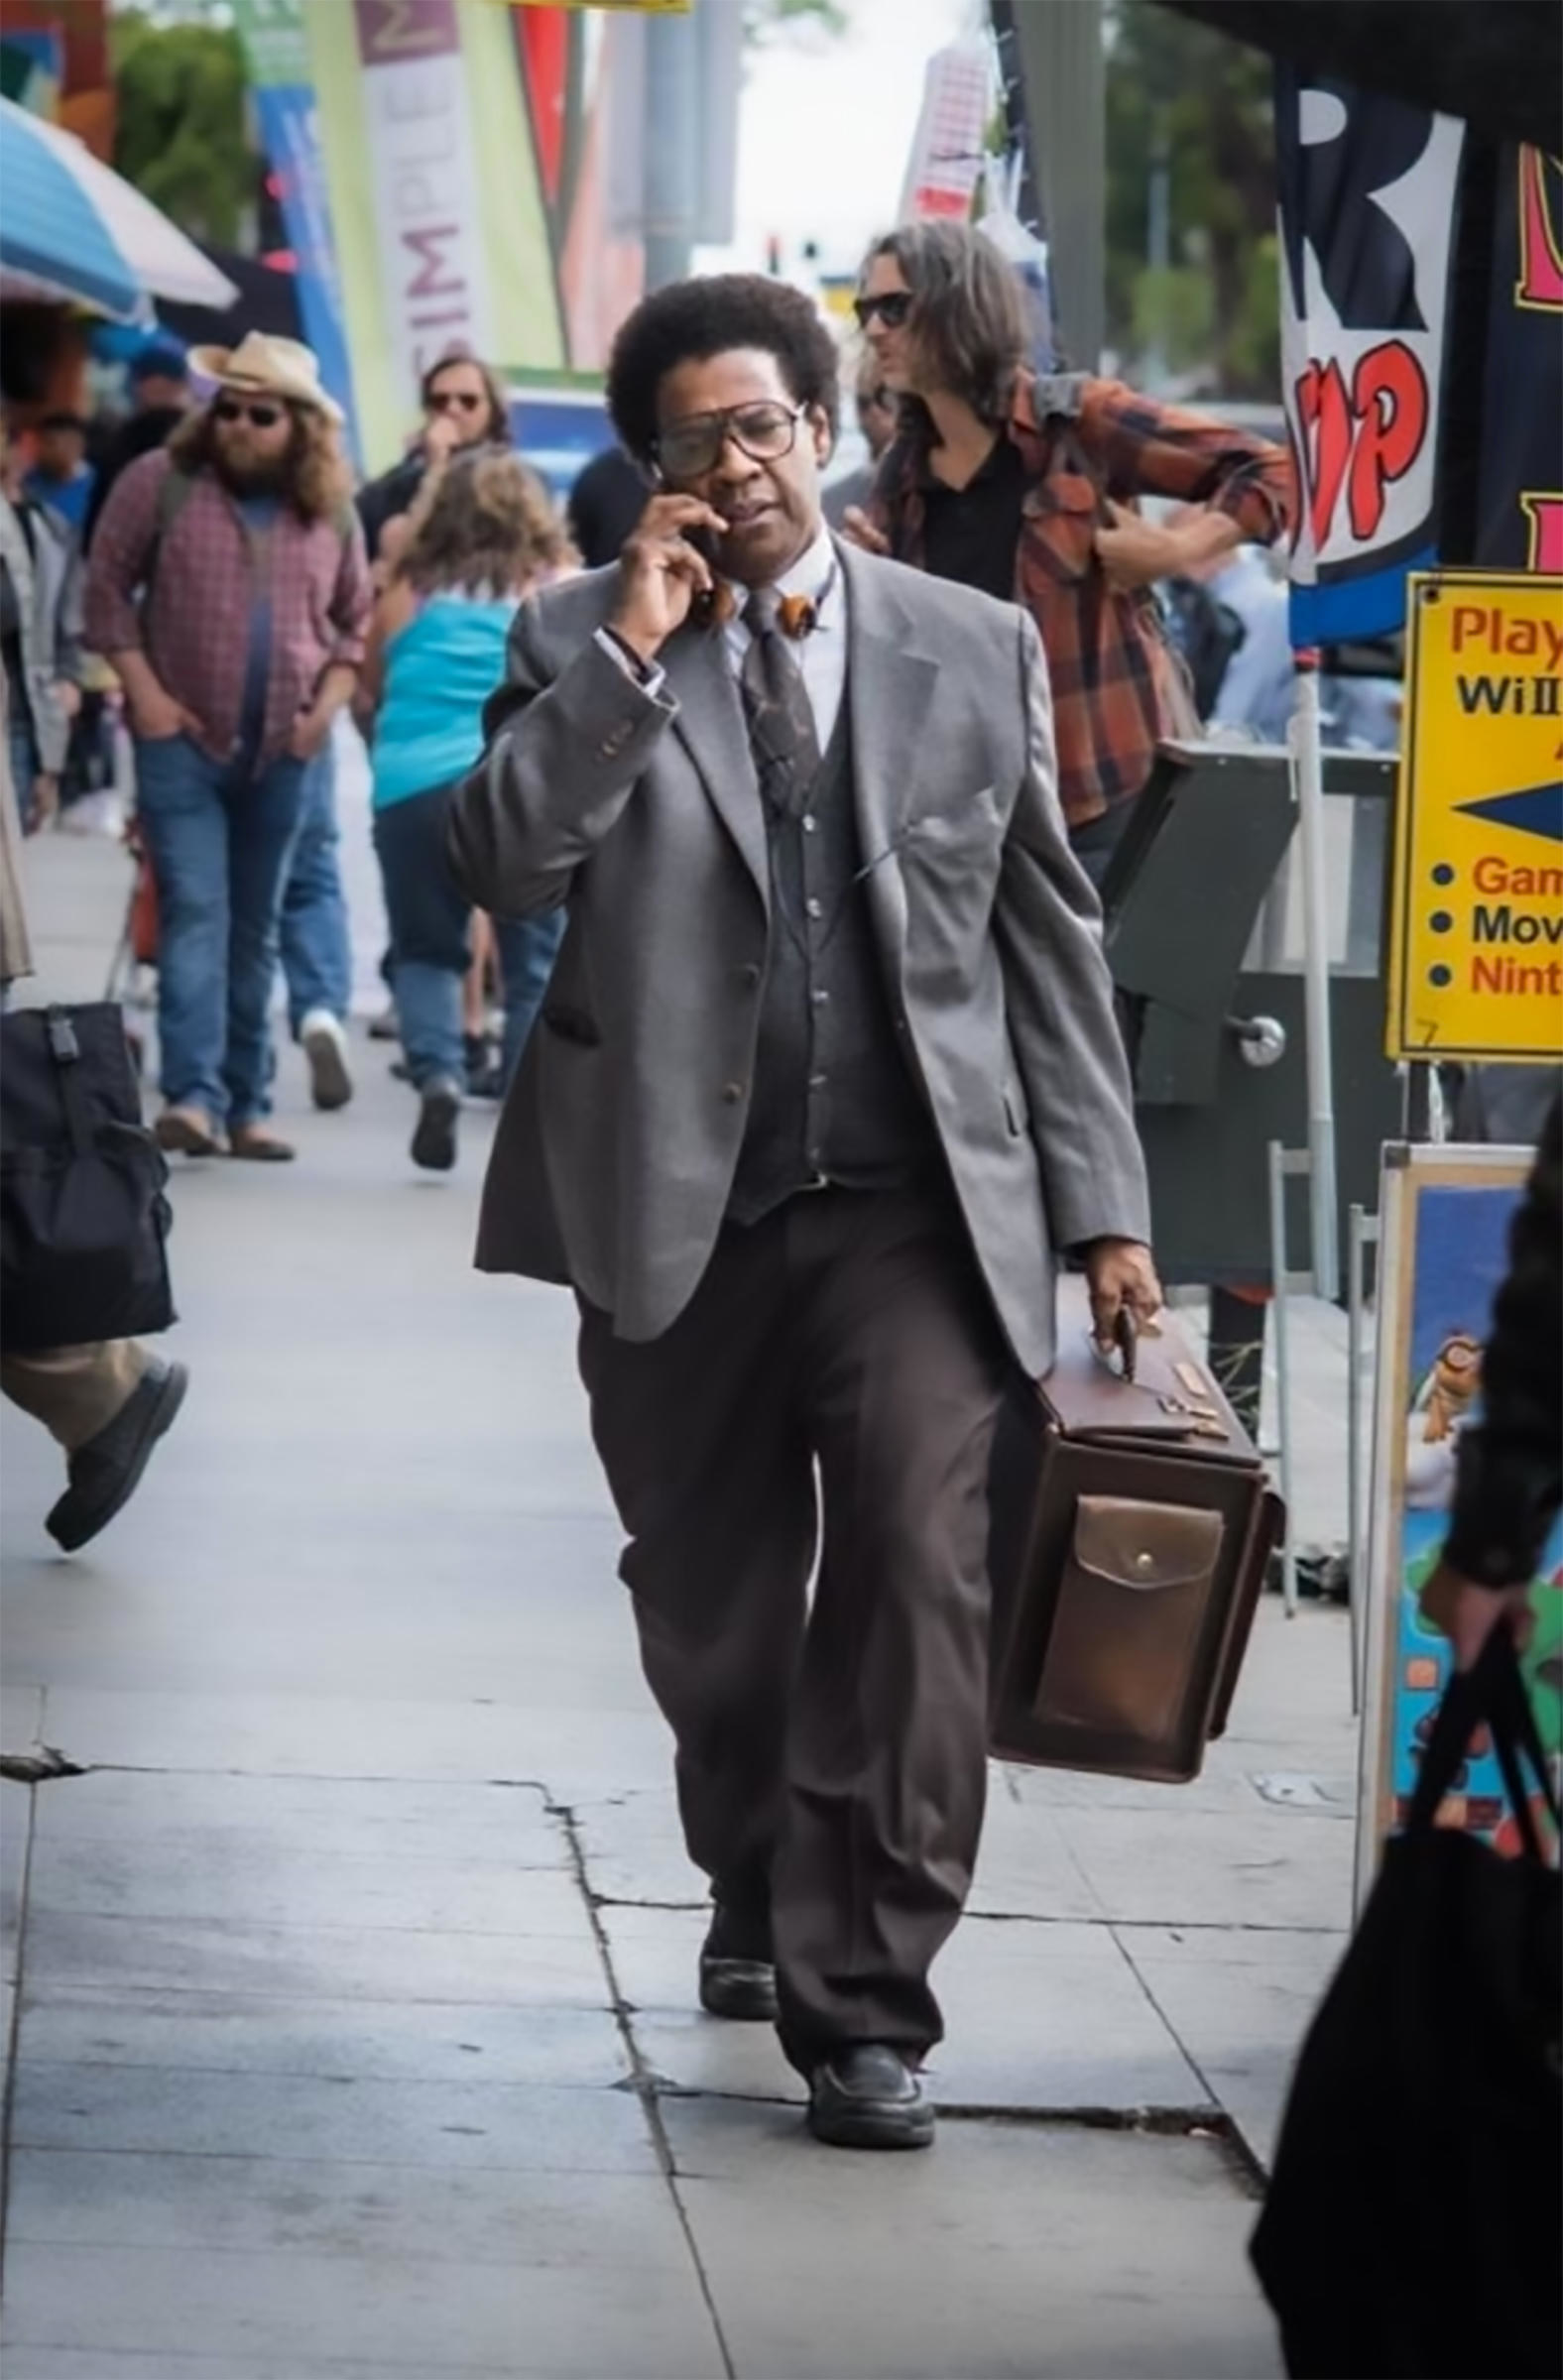 Denzel in one of his latest movies